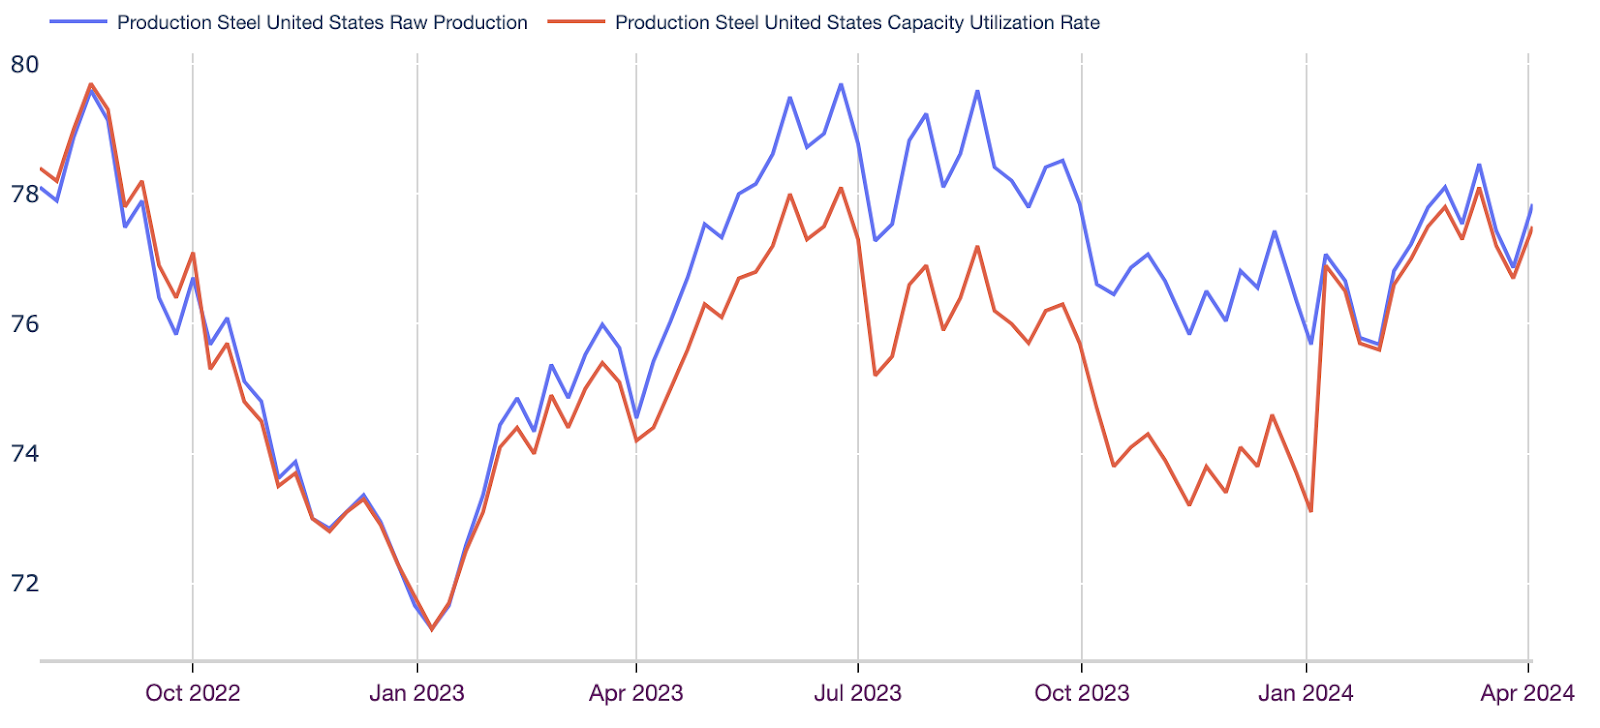 raw steel production in correlation to the capacity utilization rate in the U.S.